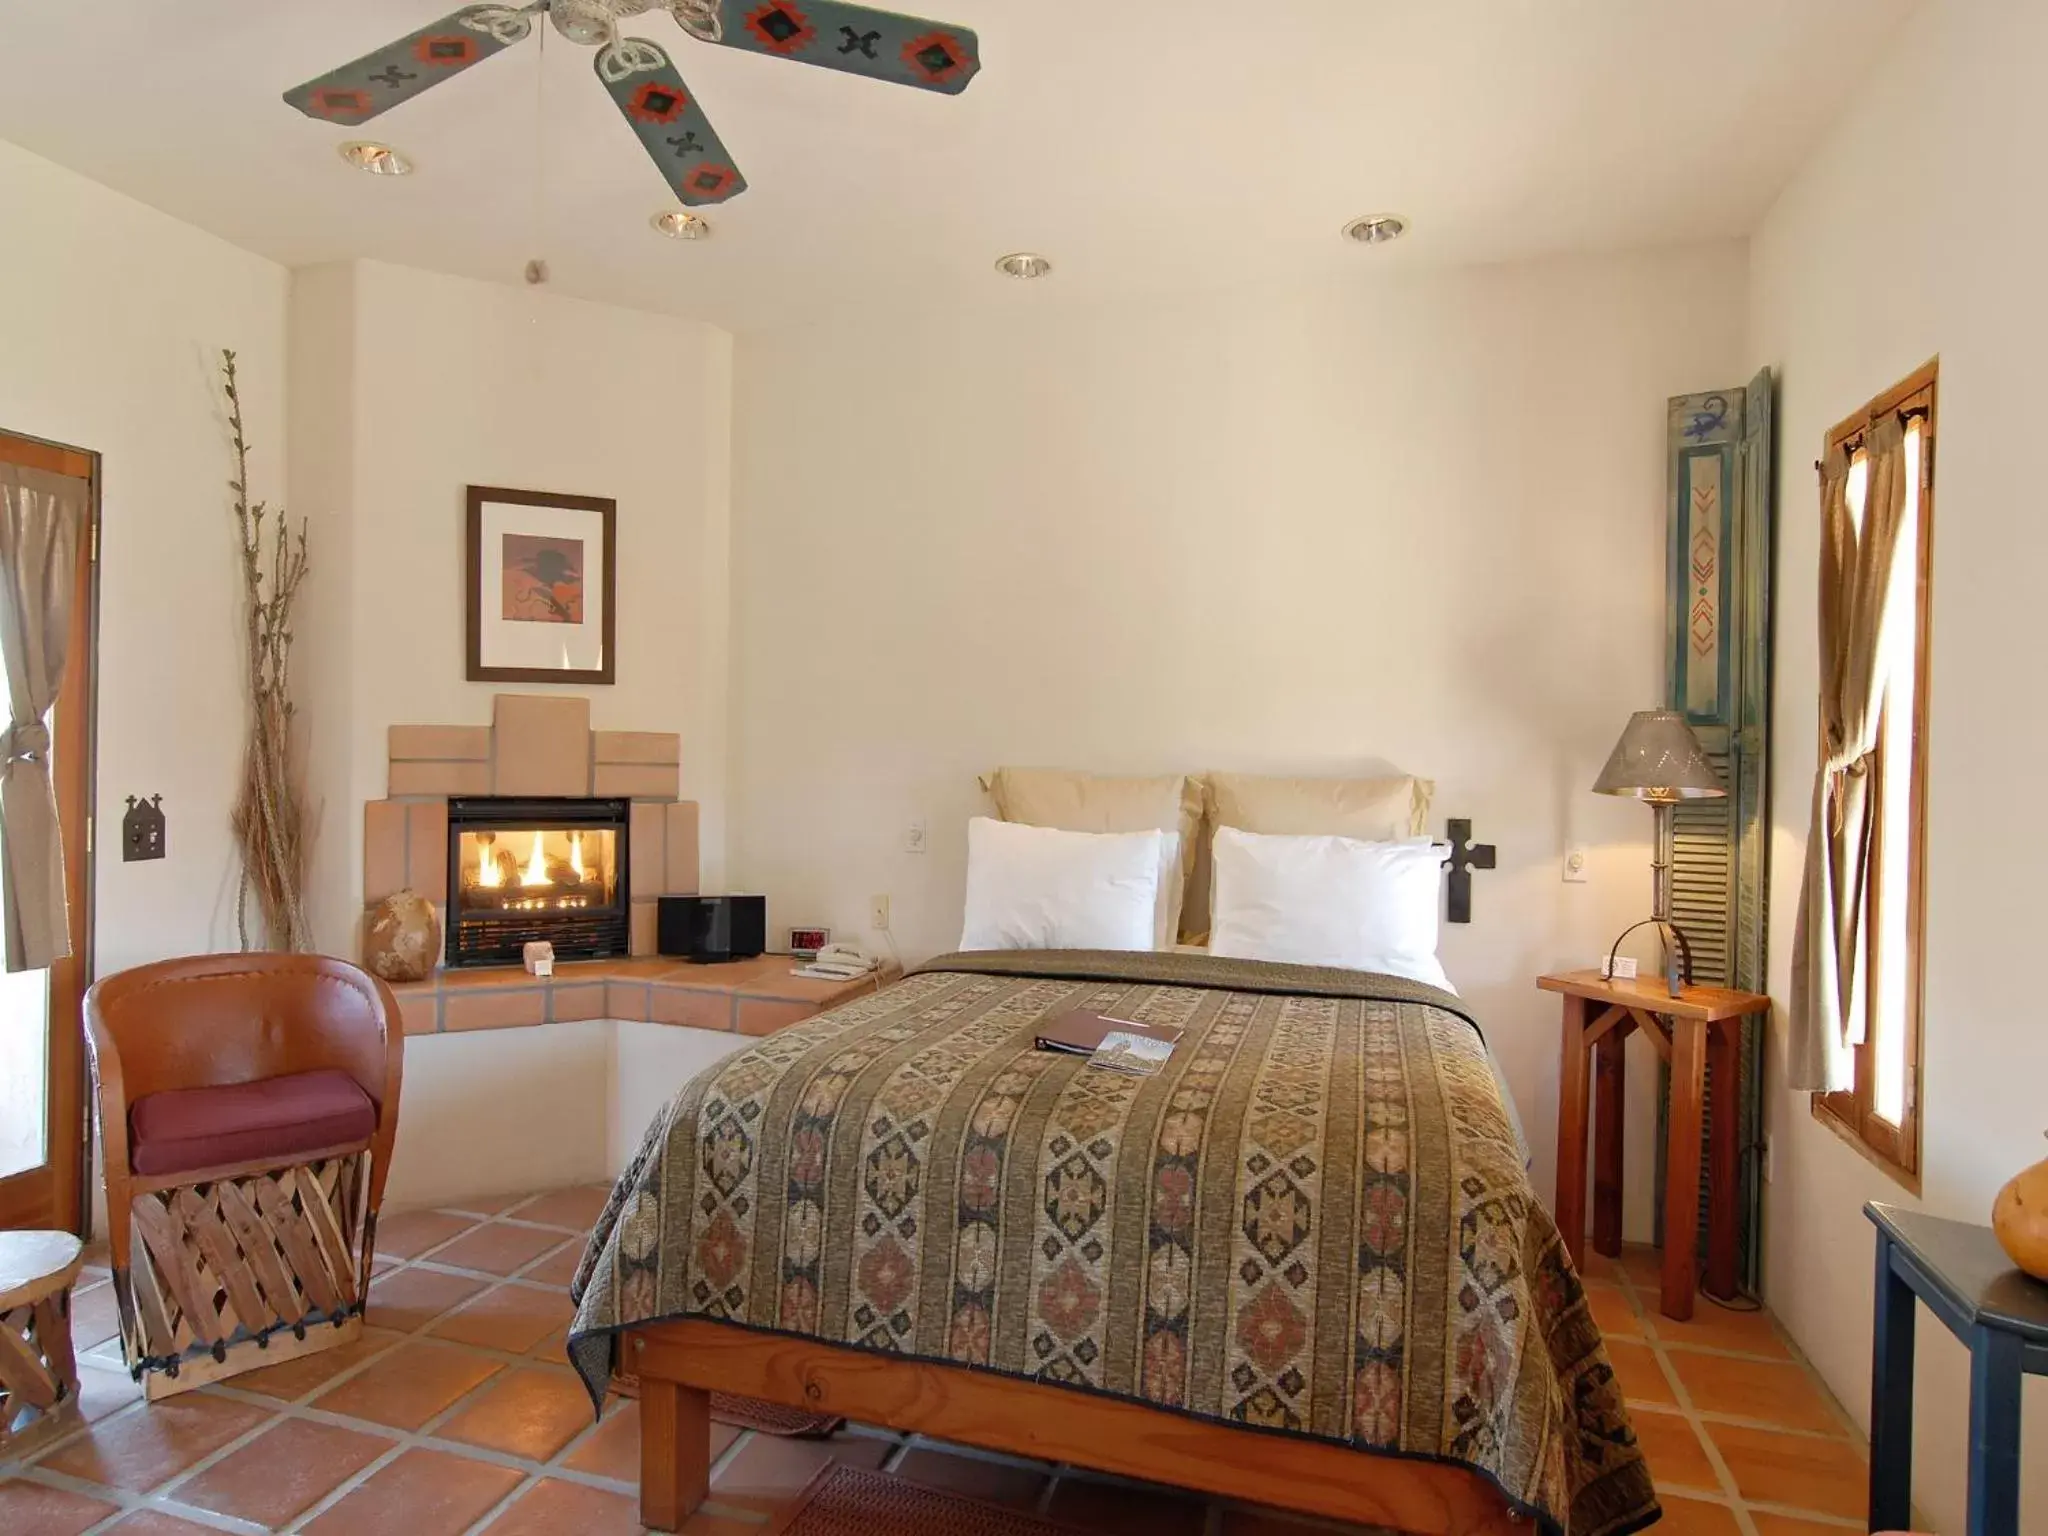 Superior Queen Room with Fireplace in Borrego Valley Inn